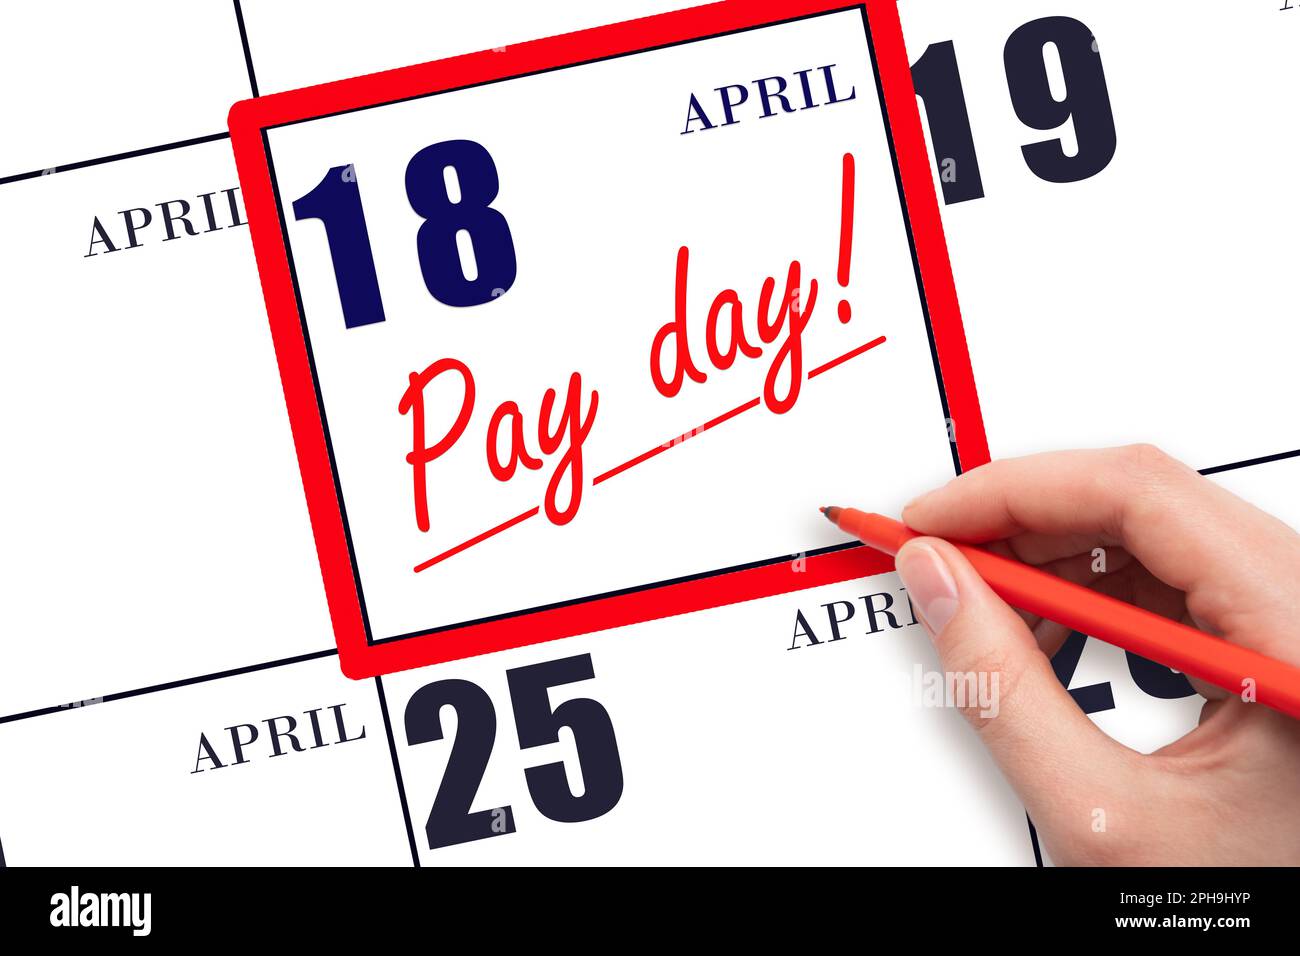 18th day of April. Hand writing text PAY DATE on calendar date April 18 and underline it. Payment due date. Reminder concept of payment. Spring month, Stock Photo